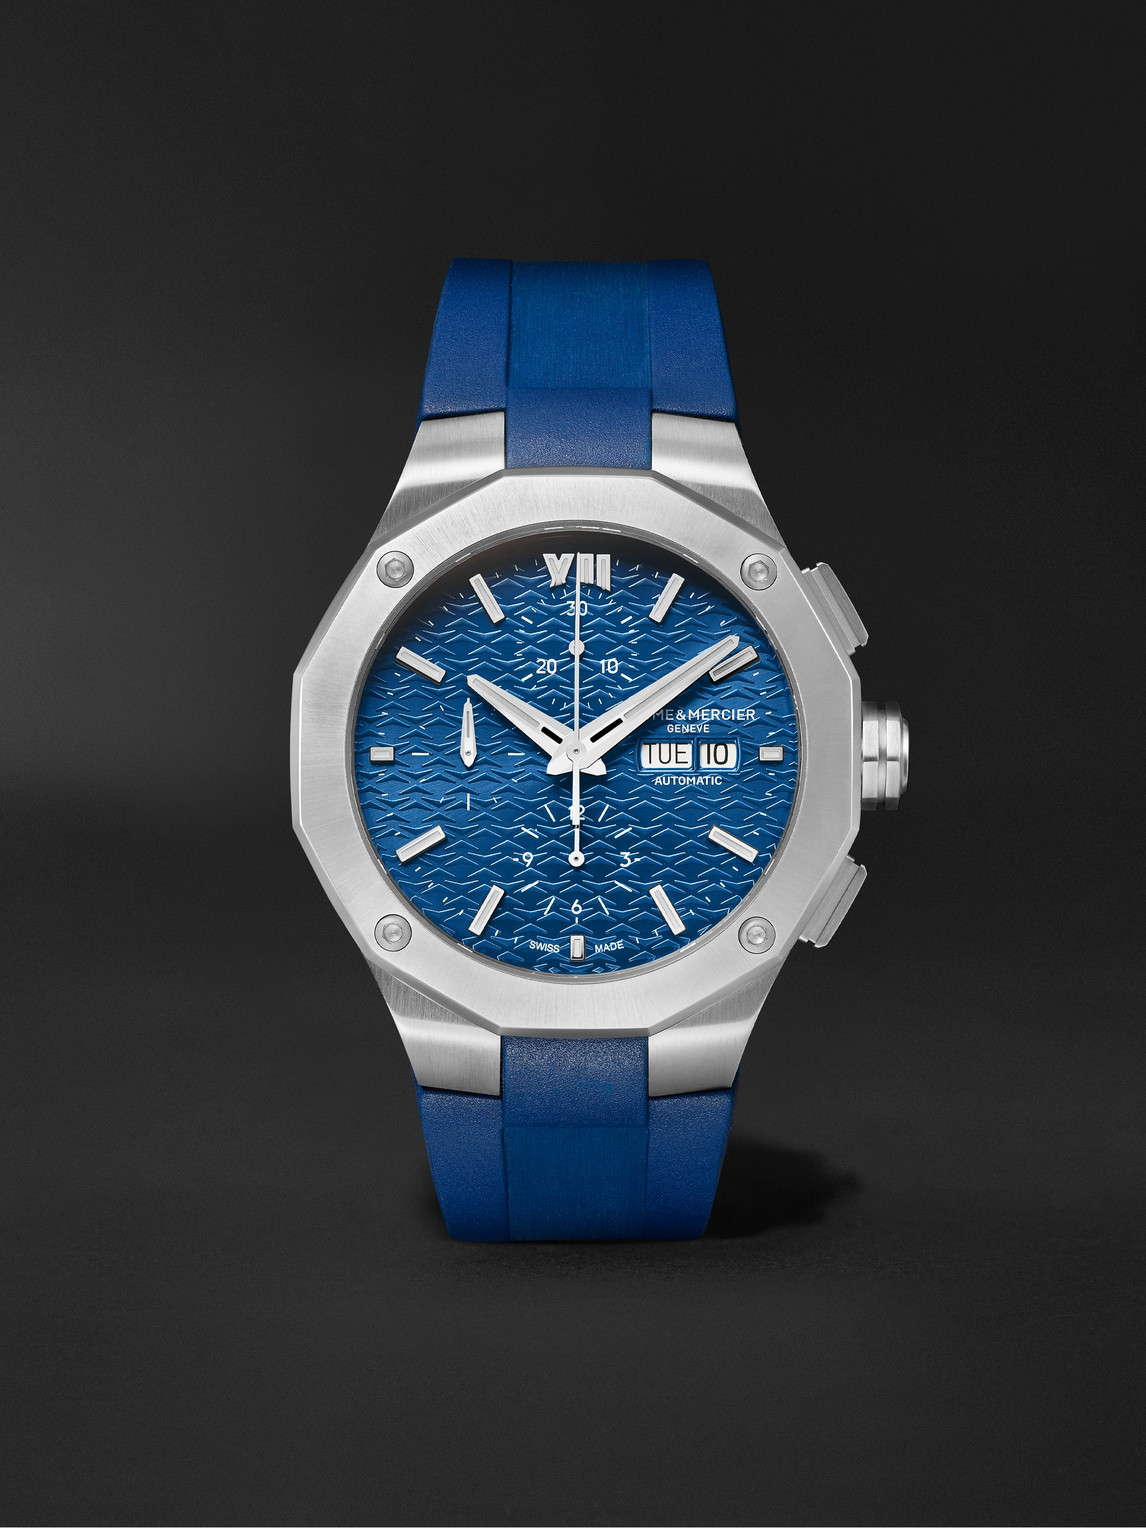 Baume & Mercier Riviera Baumatic Automatic Chronograph 43mm Stainless Steel And Rubber Watch, Ref. No. M0a10623 In Blue